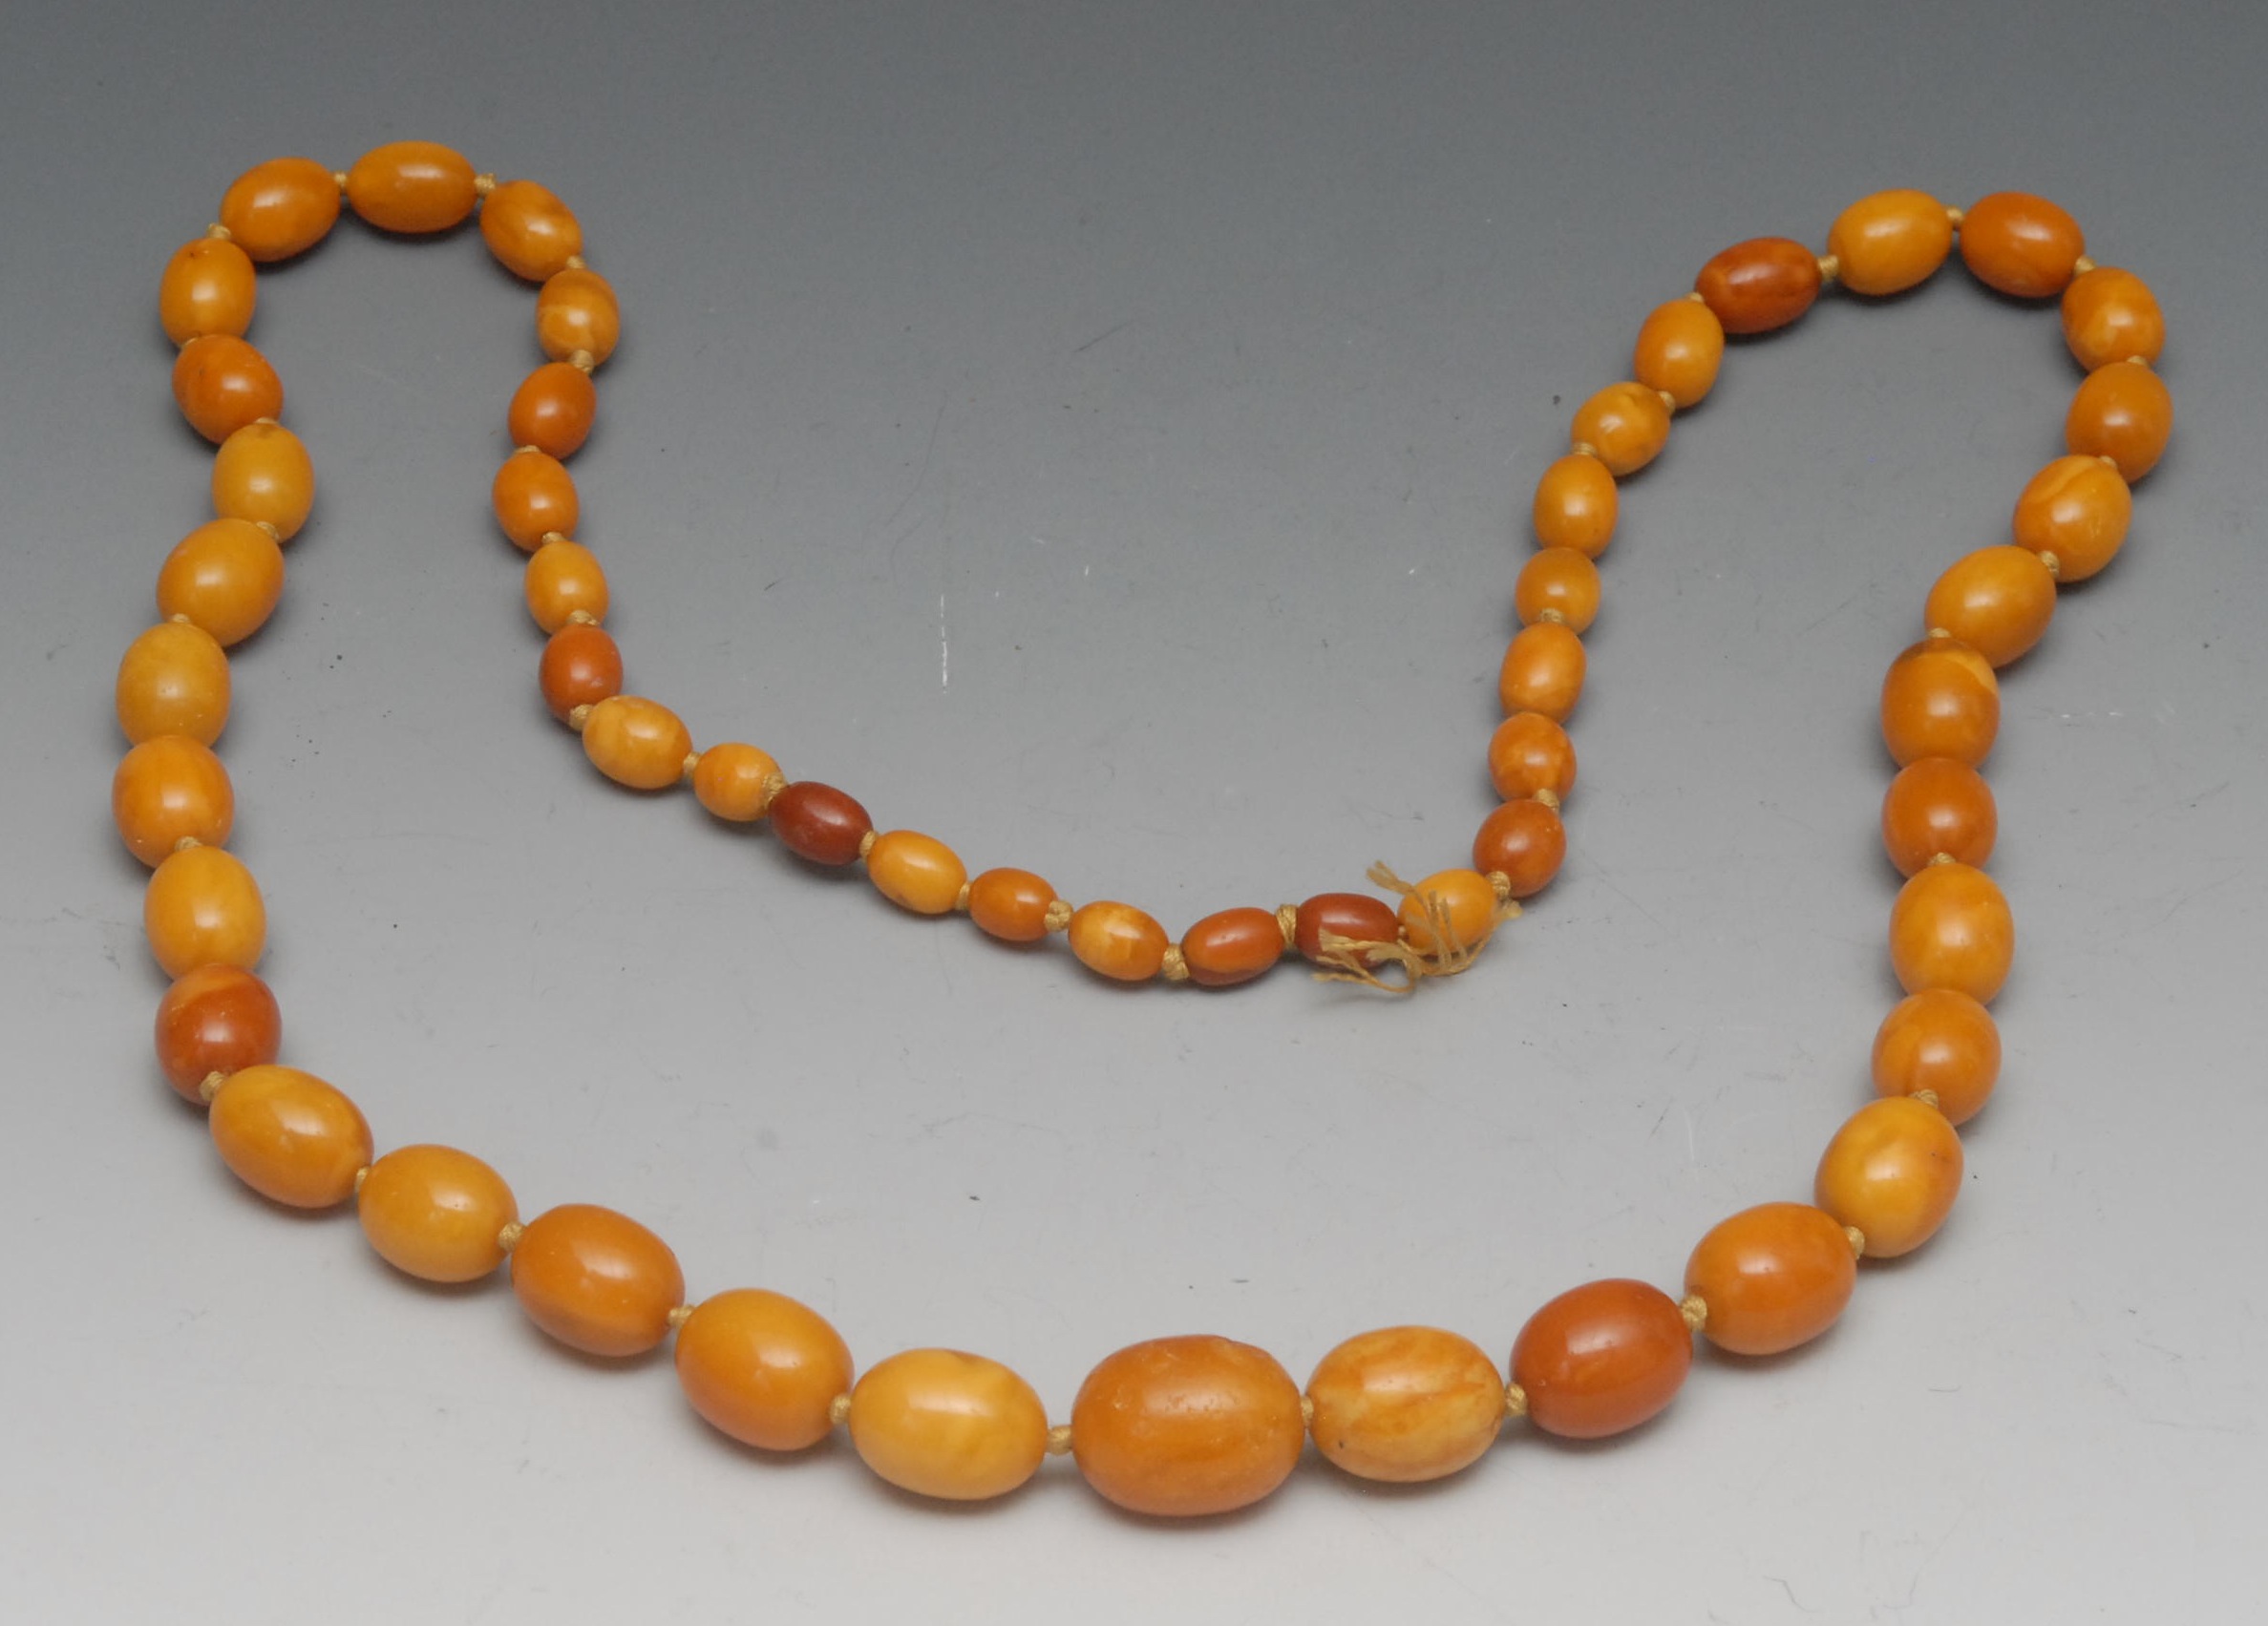 A graduated amber bead necklace, fifty-three graduated beads, of mottled yellow and butterscotch